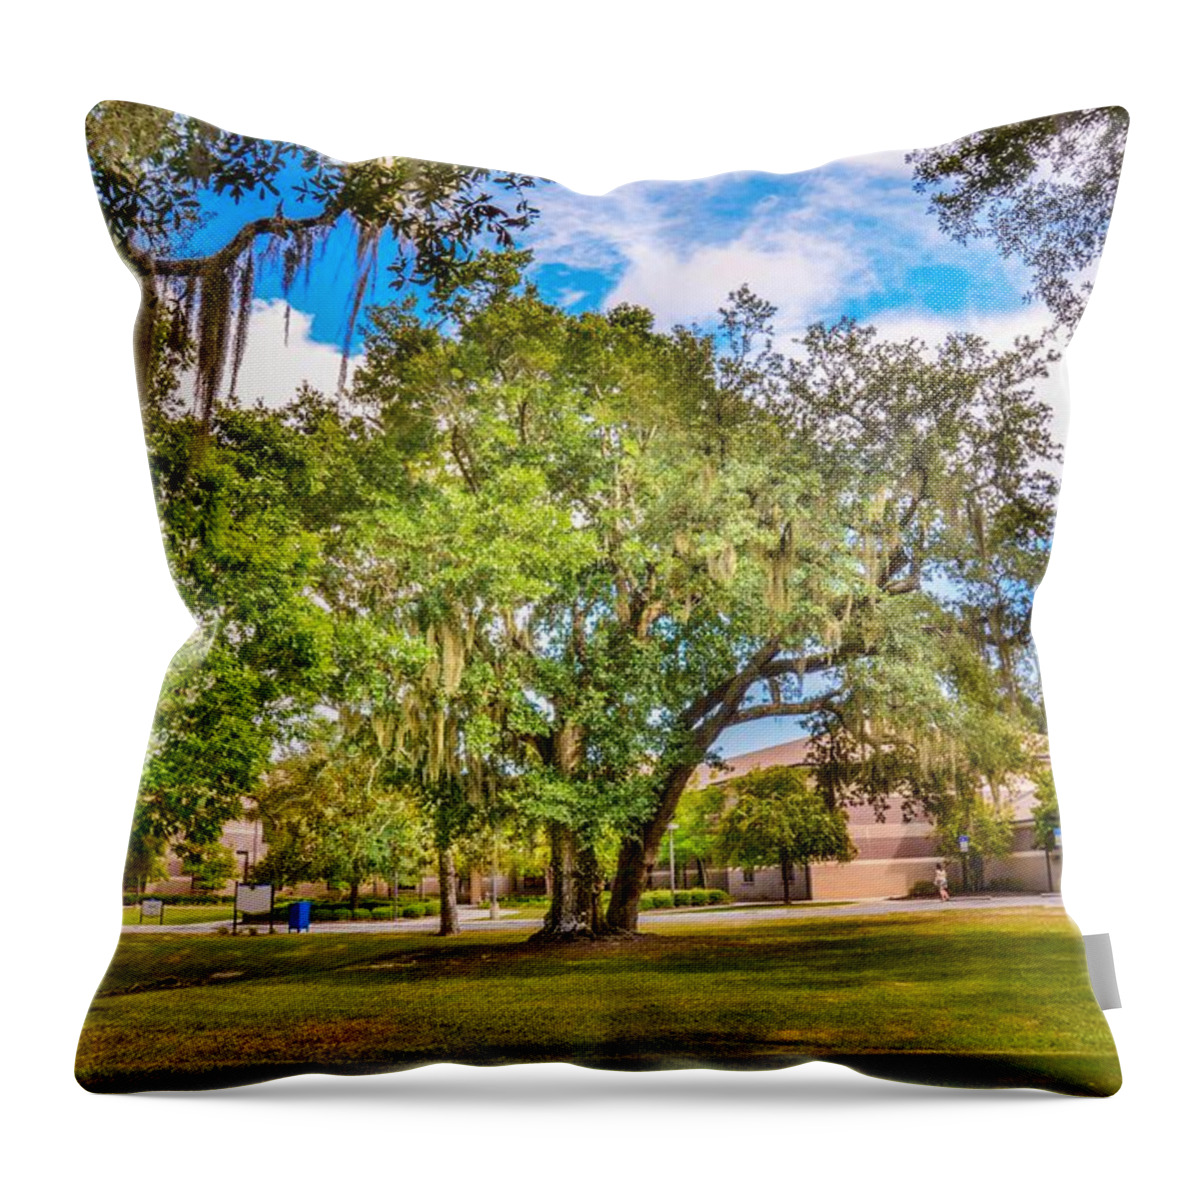 Hdr Throw Pillow featuring the photograph University Tree by Jon Cody